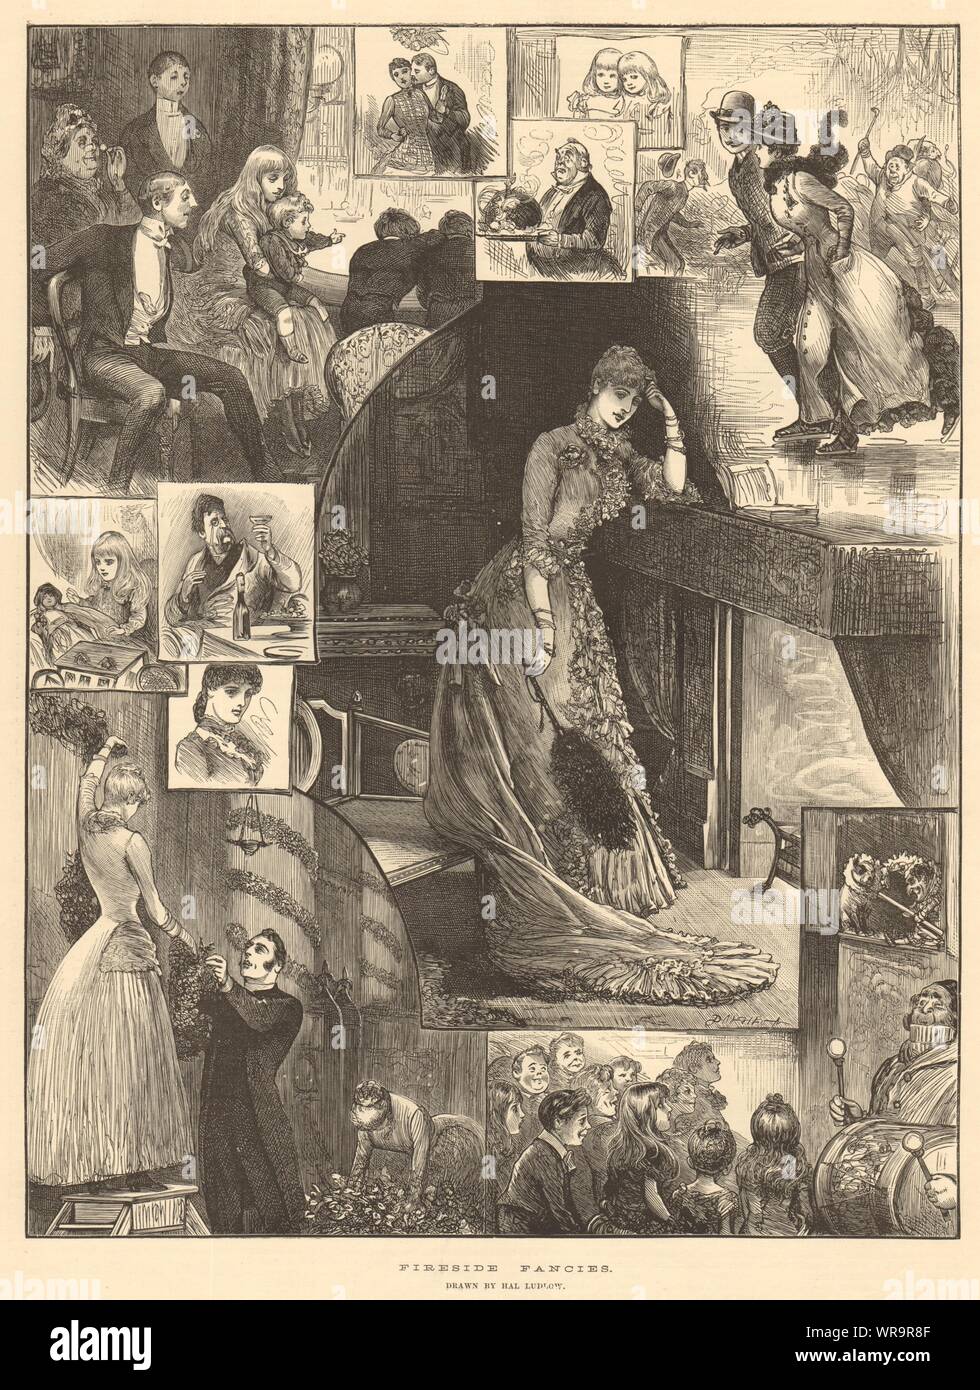 Fireside fancies. Drawn by Hal Ludlow. Romance 1883 antique ILN full page print Stock Photo